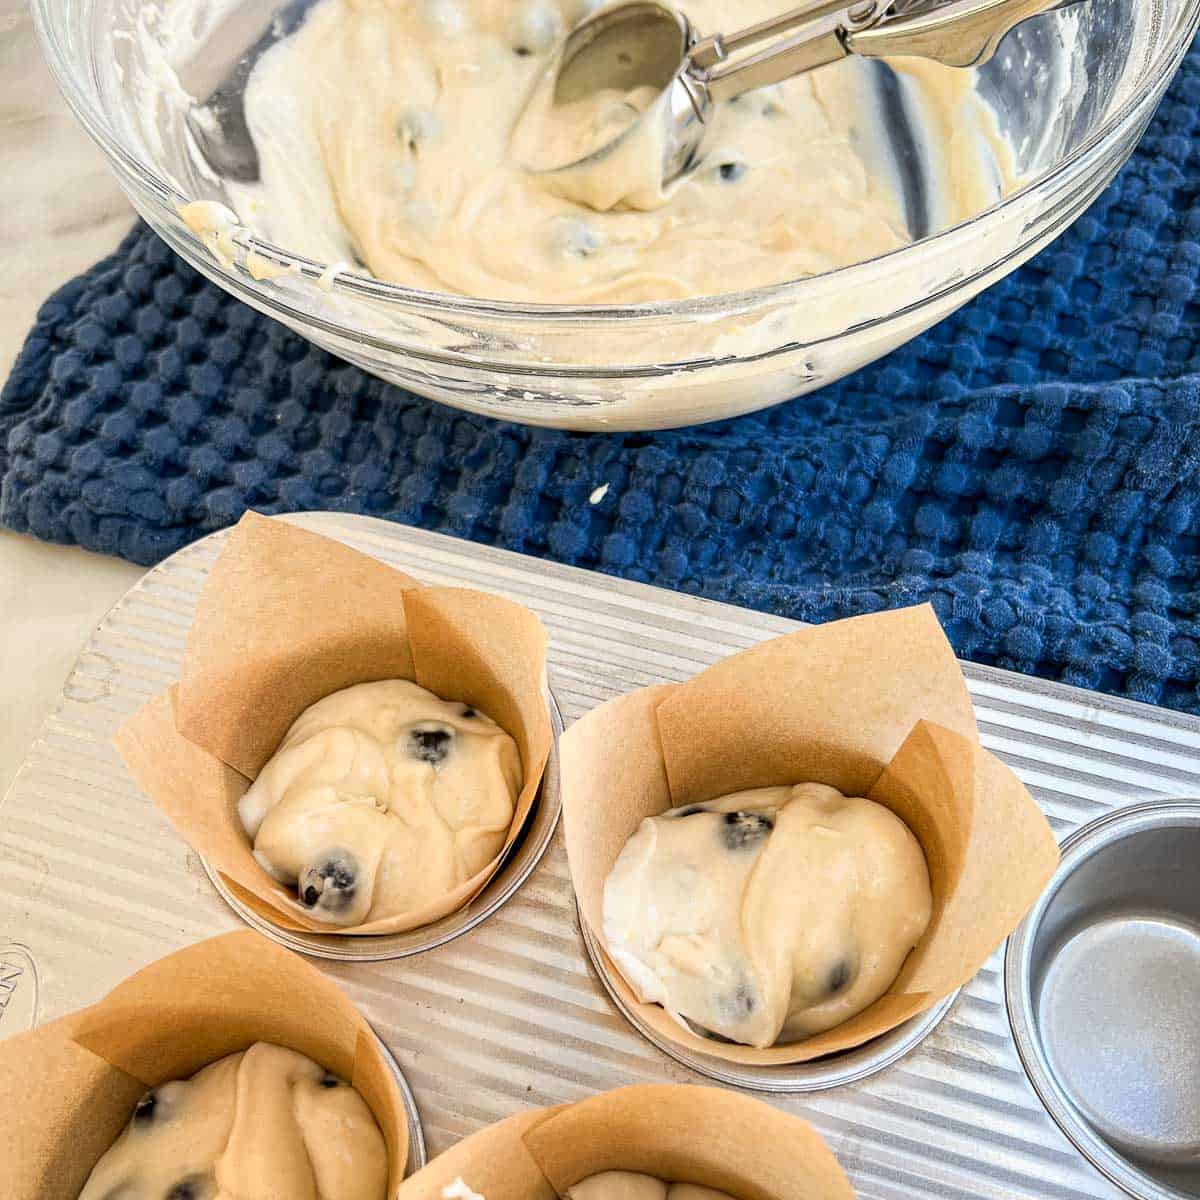 A muffin pan being filled with blueberry muffin batter with a bowlful of batter and a cookie scoop.